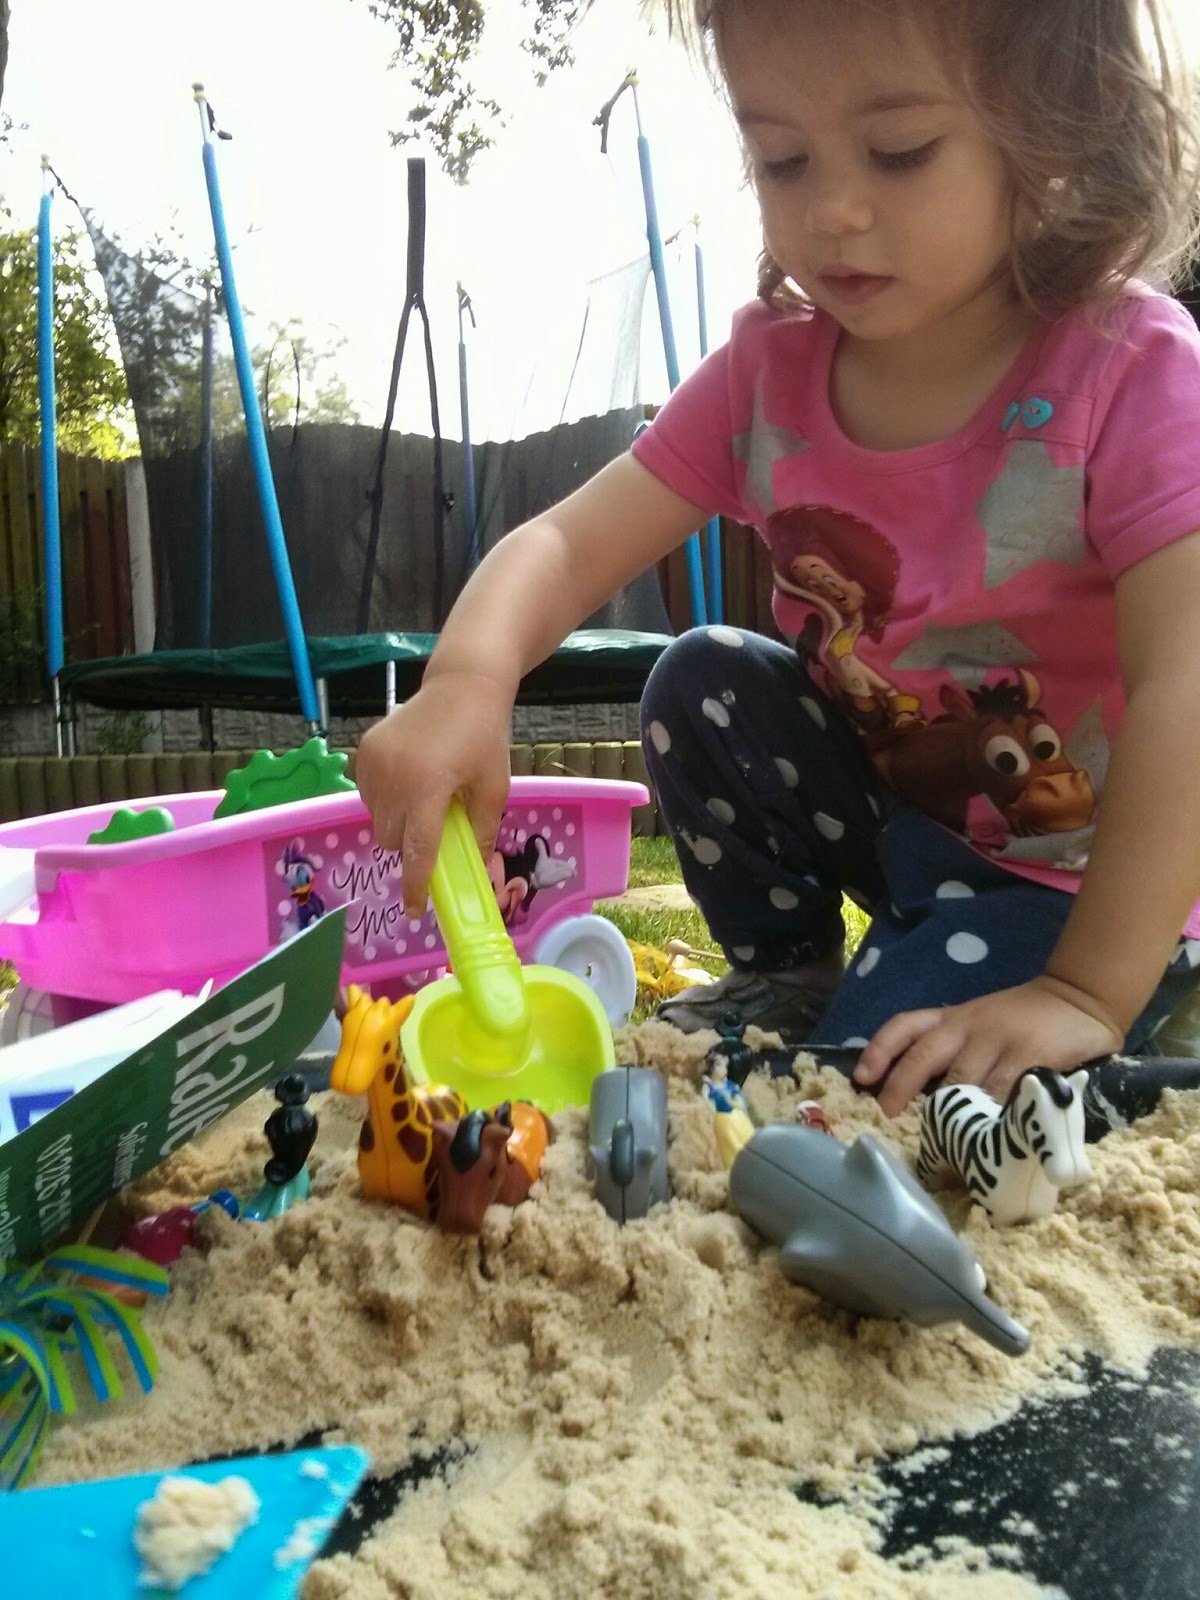 Using sand for messy play